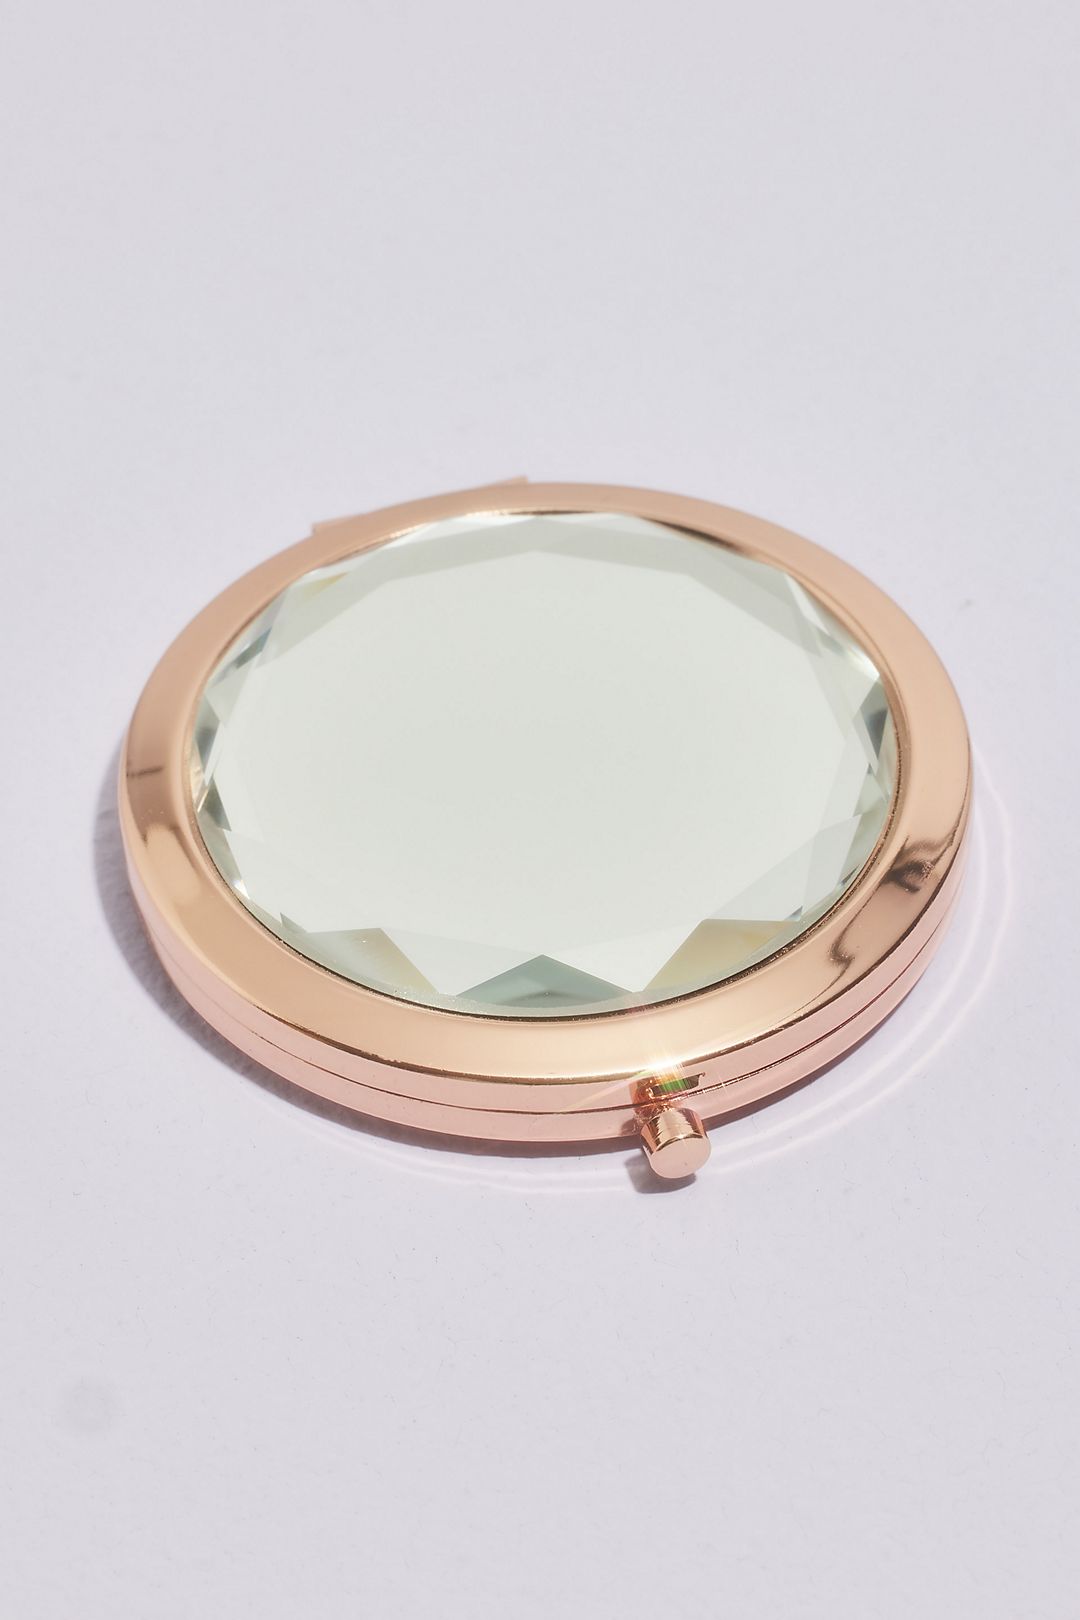 Faceted Rose Gold Compact Mirror Image 1